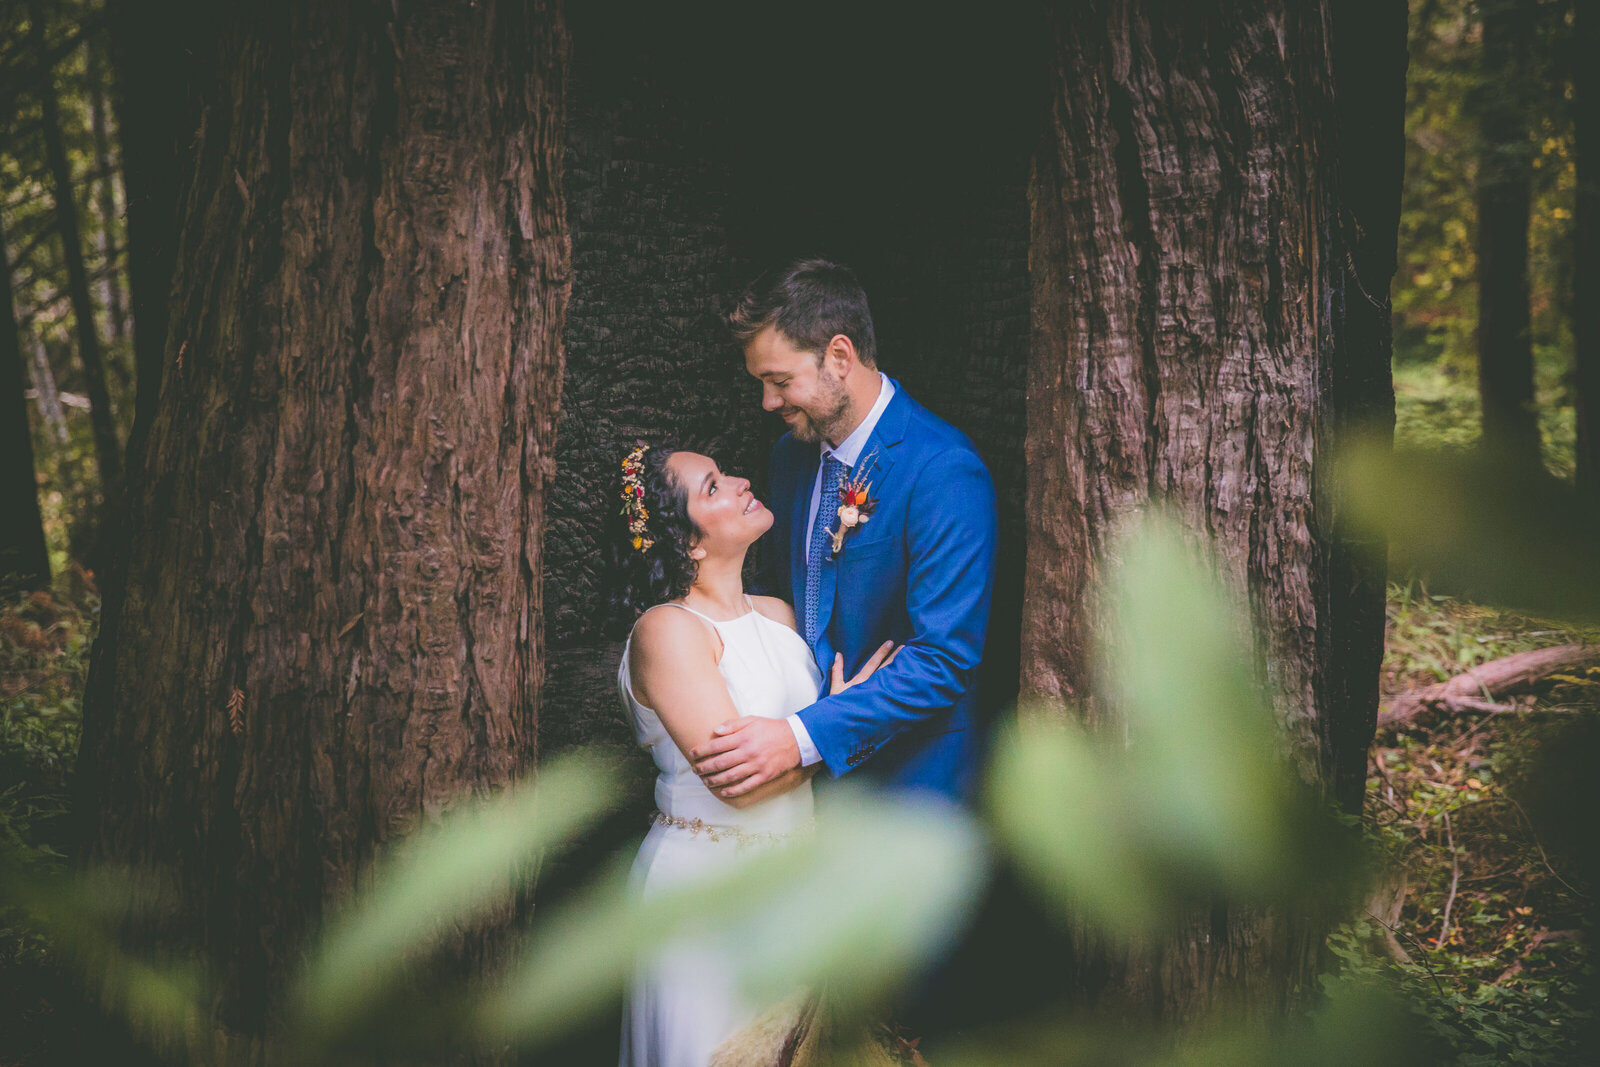 An eloping bride and groom pose for portraits in a redwood tree.